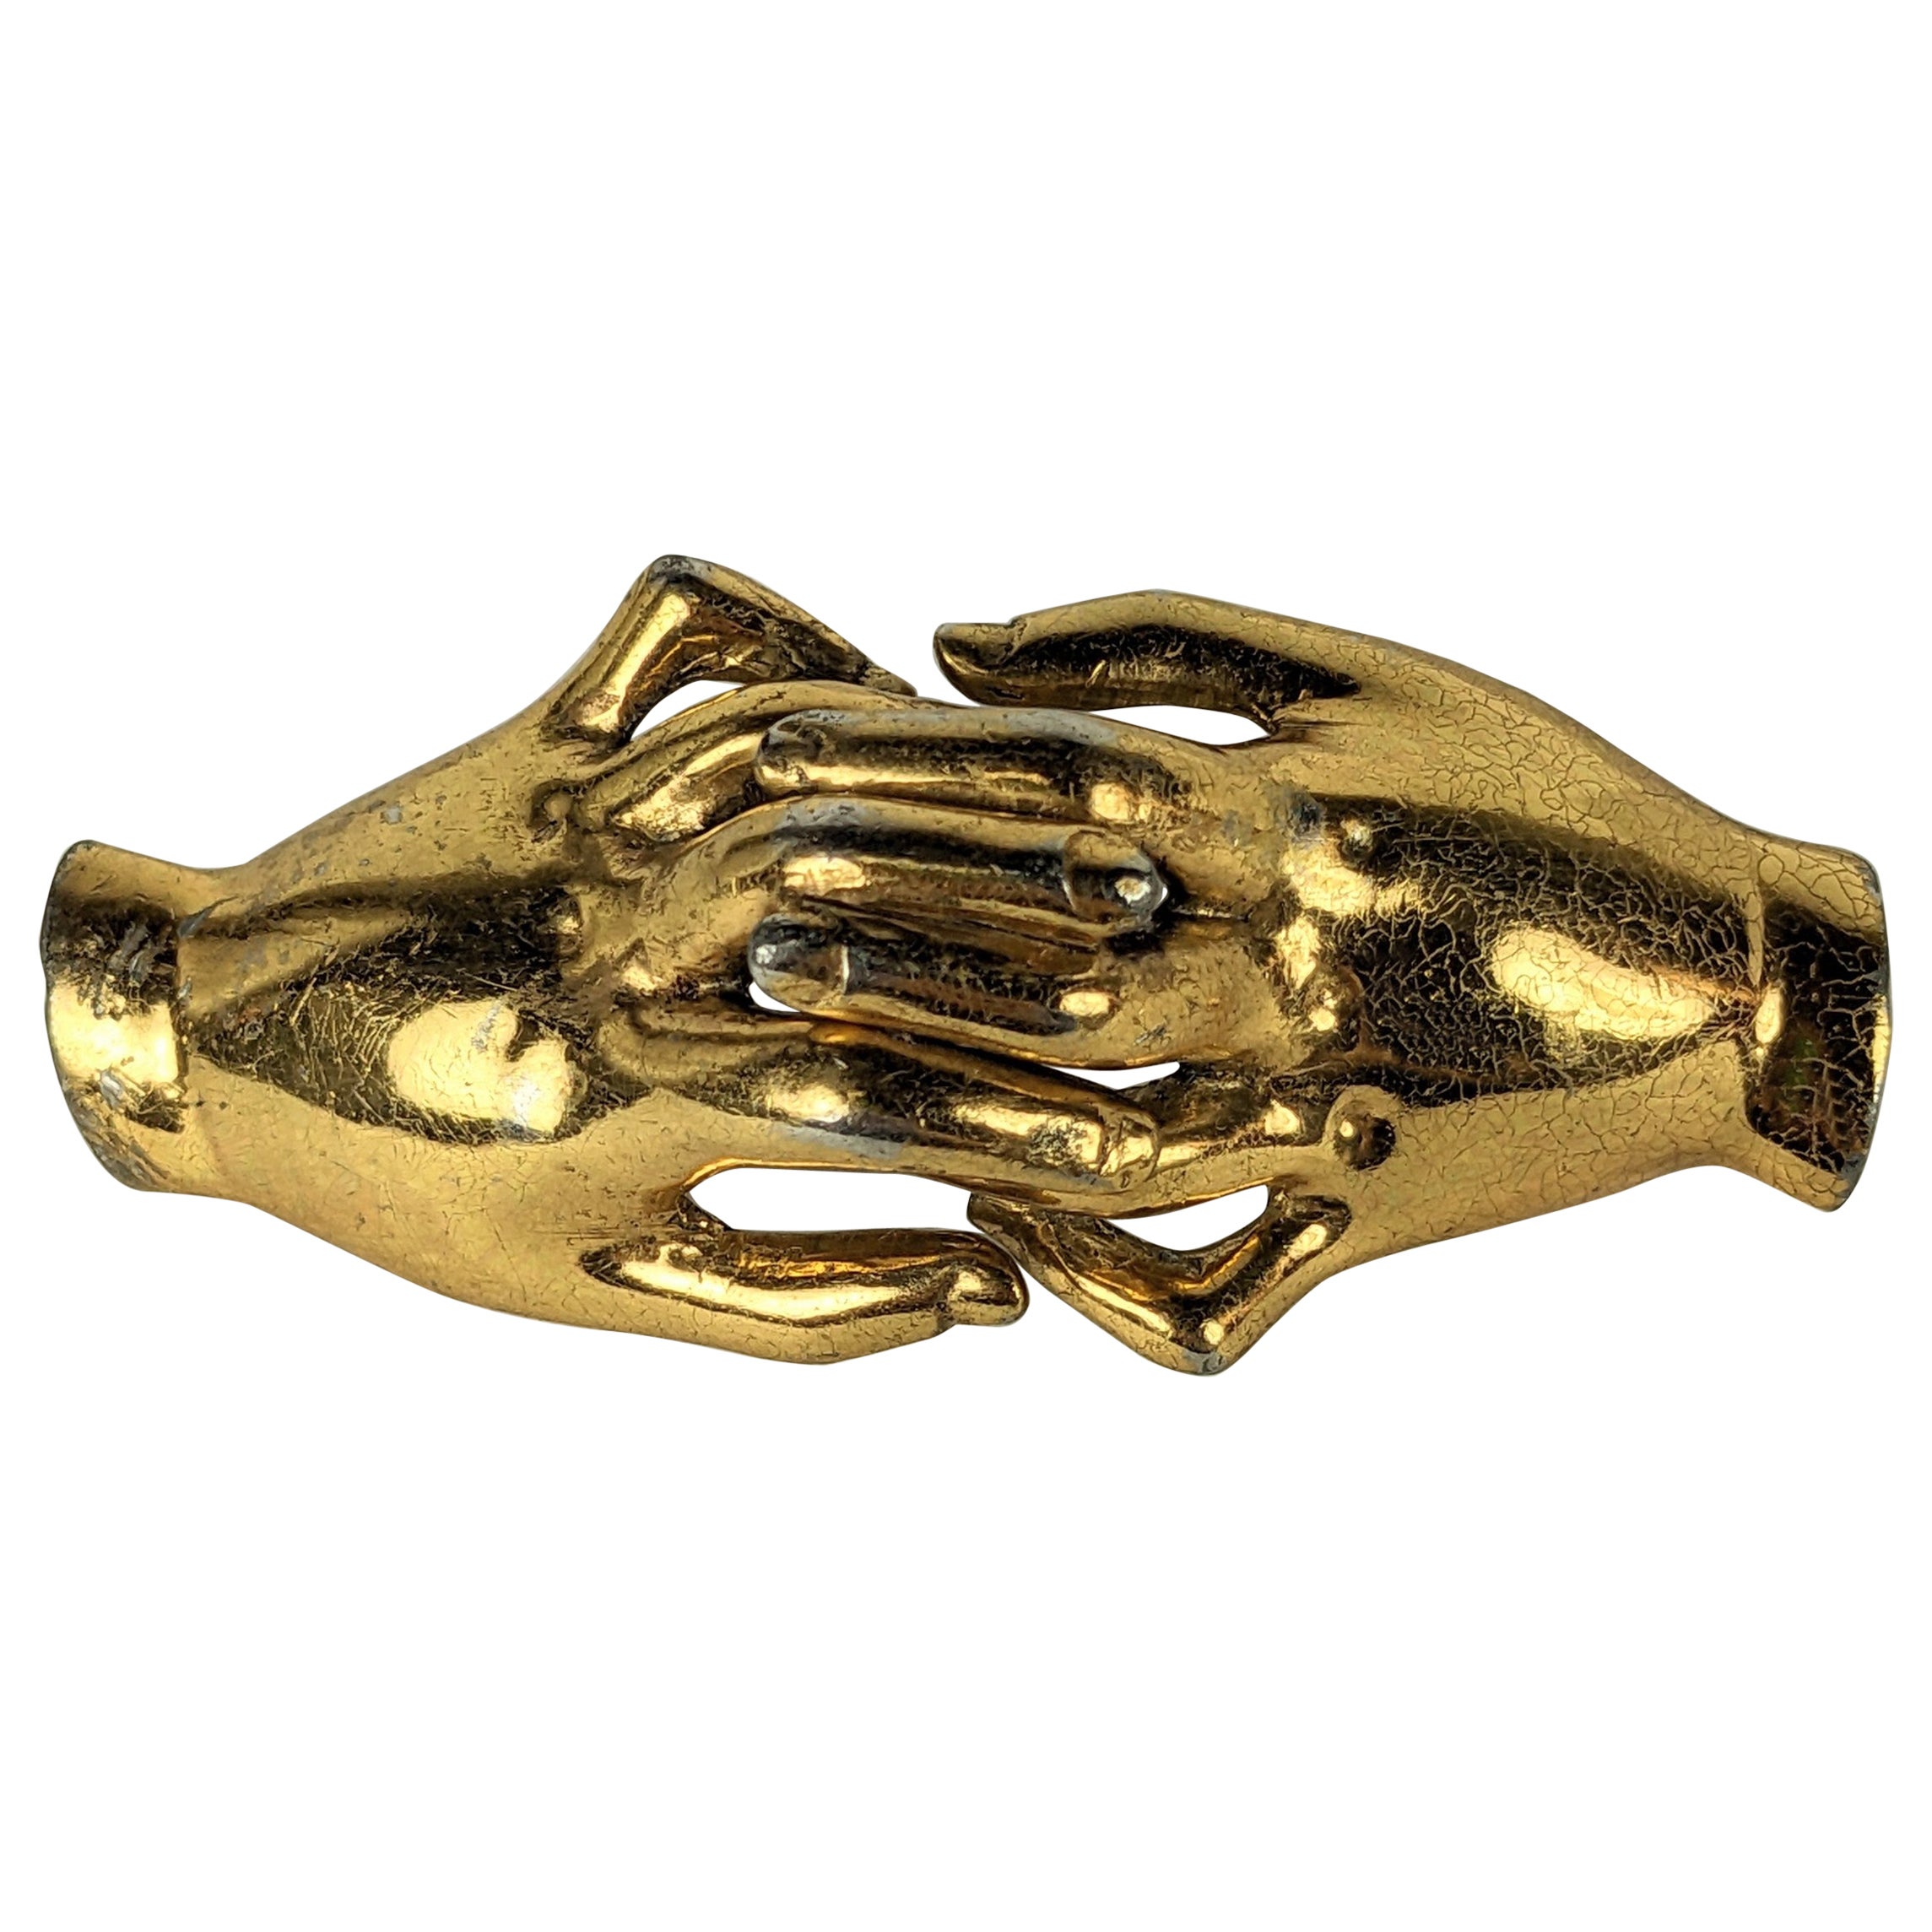 Silson Clutched Hands Retro Corsage Brooch